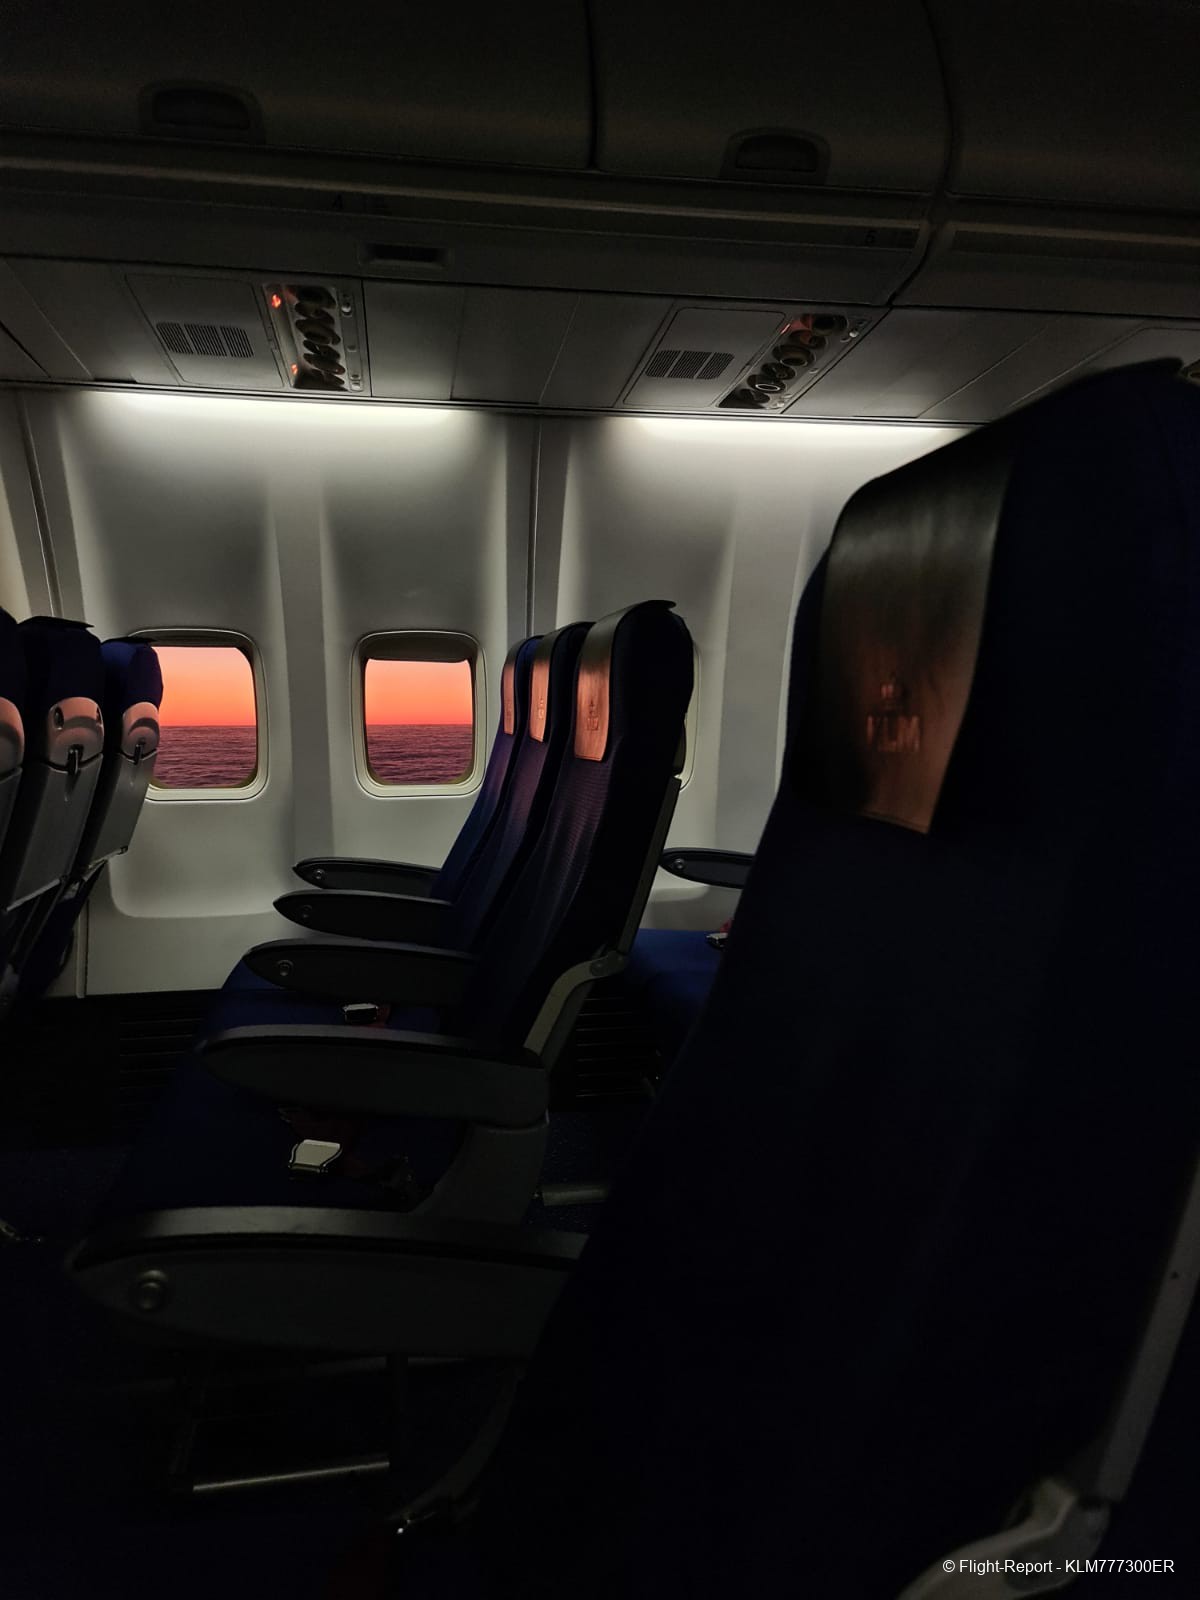 Review of KLM flight from Glasgow to Amsterdam in Premium Eco